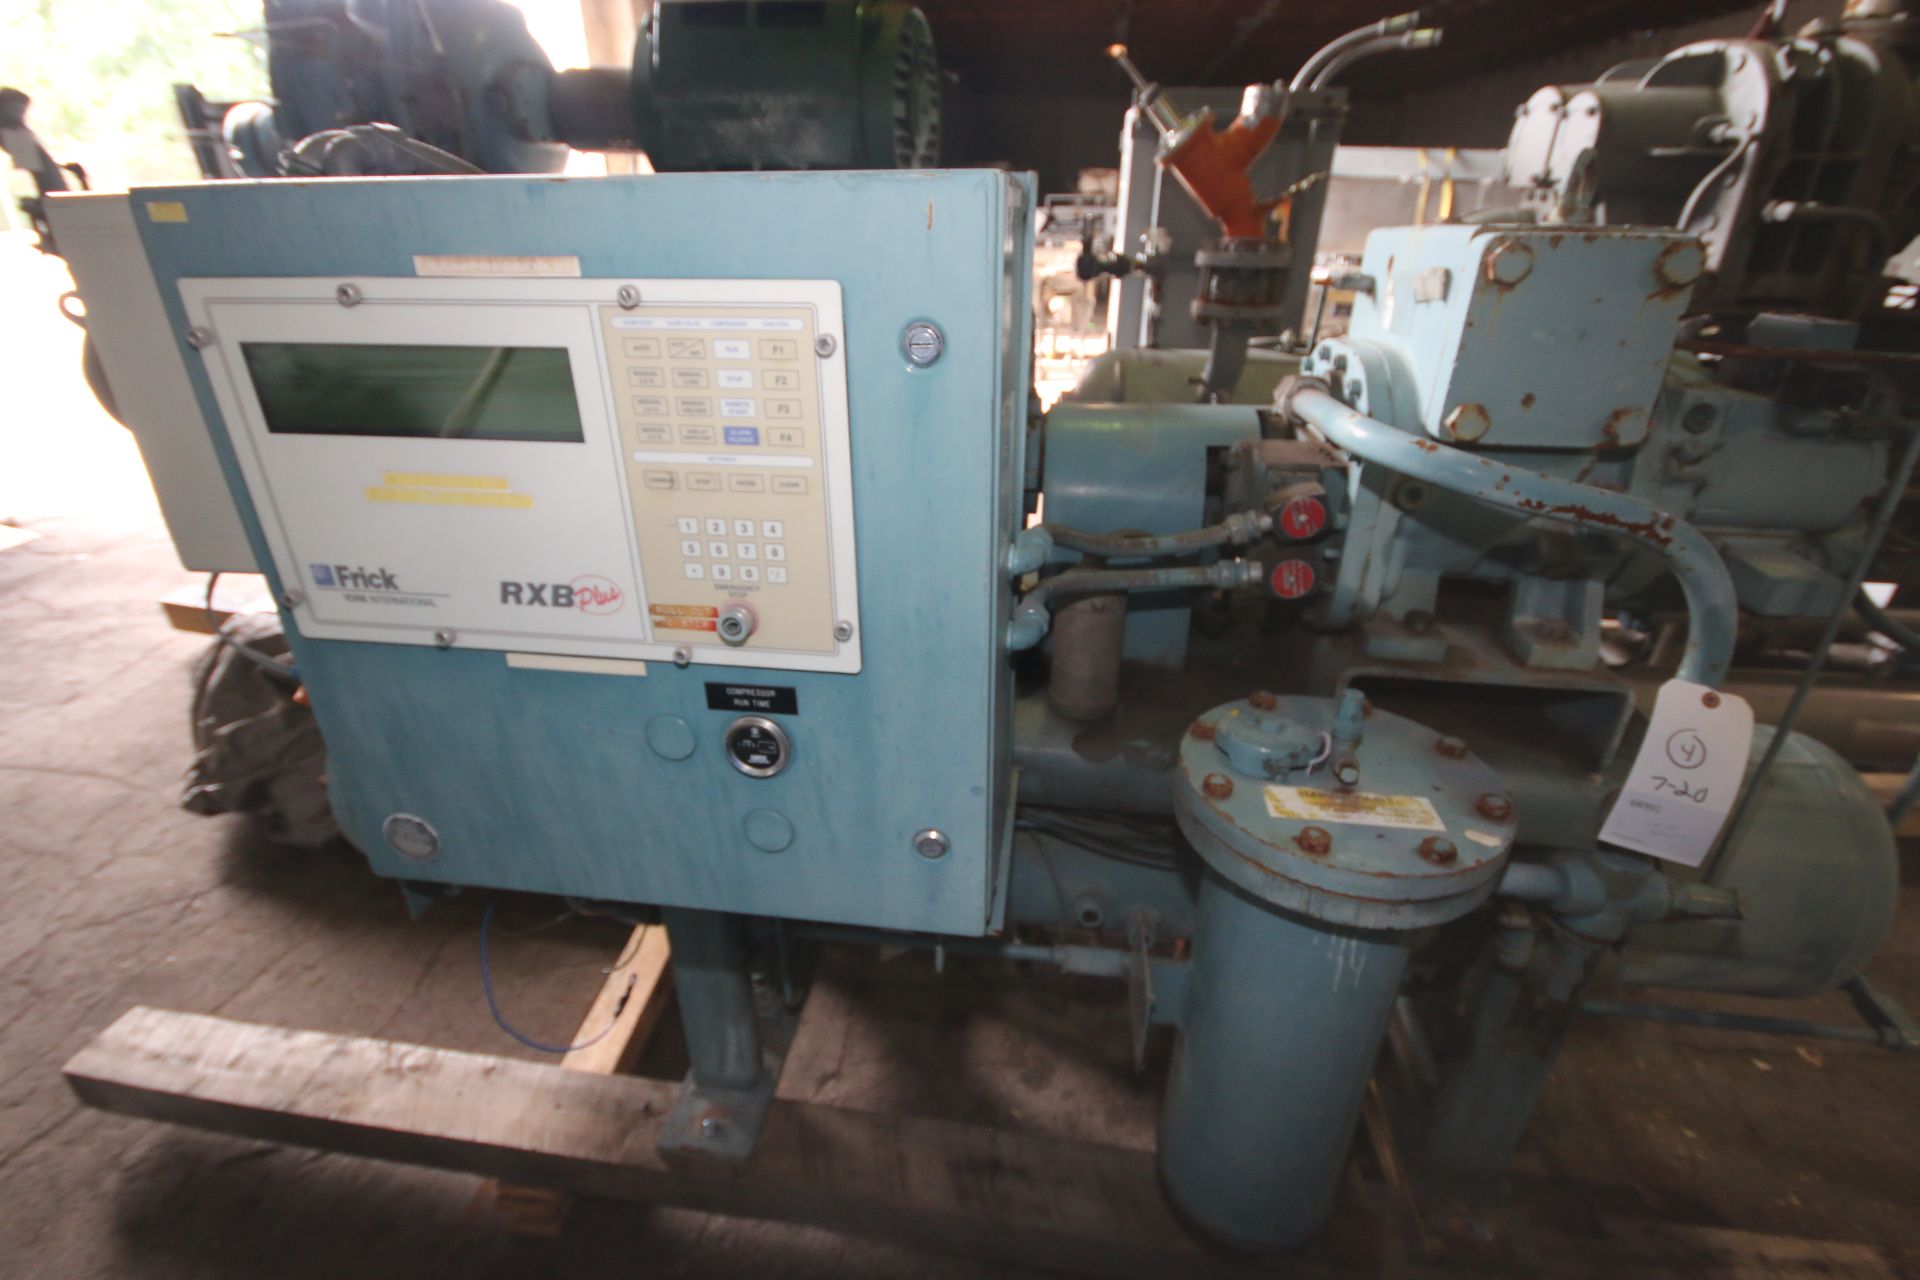 Frick 125 hp Screw Ammonia Air Compressor, NAT'L BD #: 98997, with RAM 3450 RPM Motor, 460 Volts, - Image 3 of 14